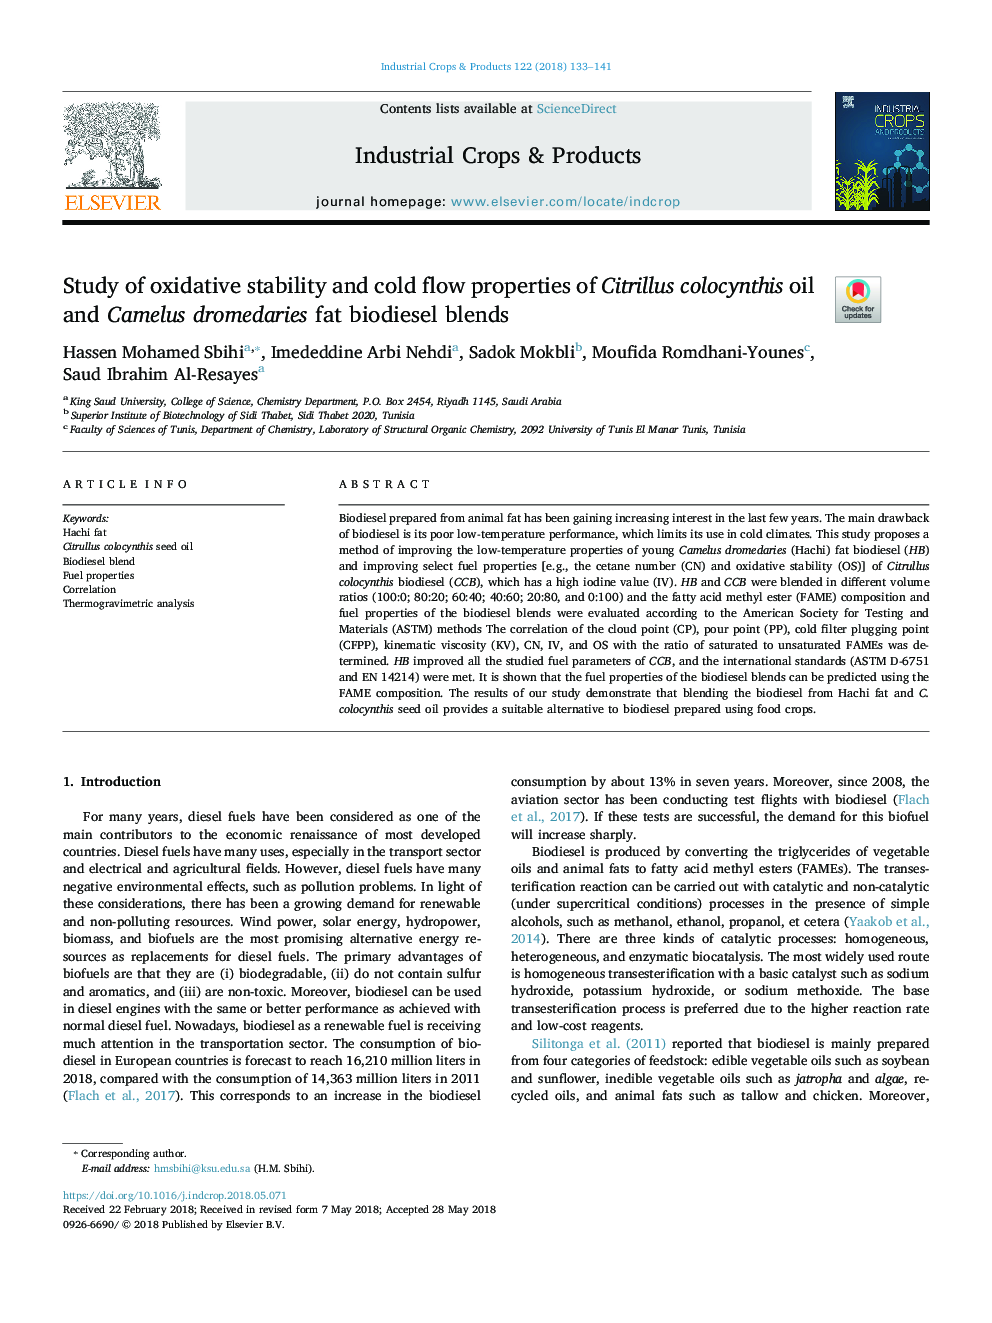 Study of oxidative stability and cold flow properties of Citrillus colocynthis oil and Camelus dromedaries fat biodiesel blends